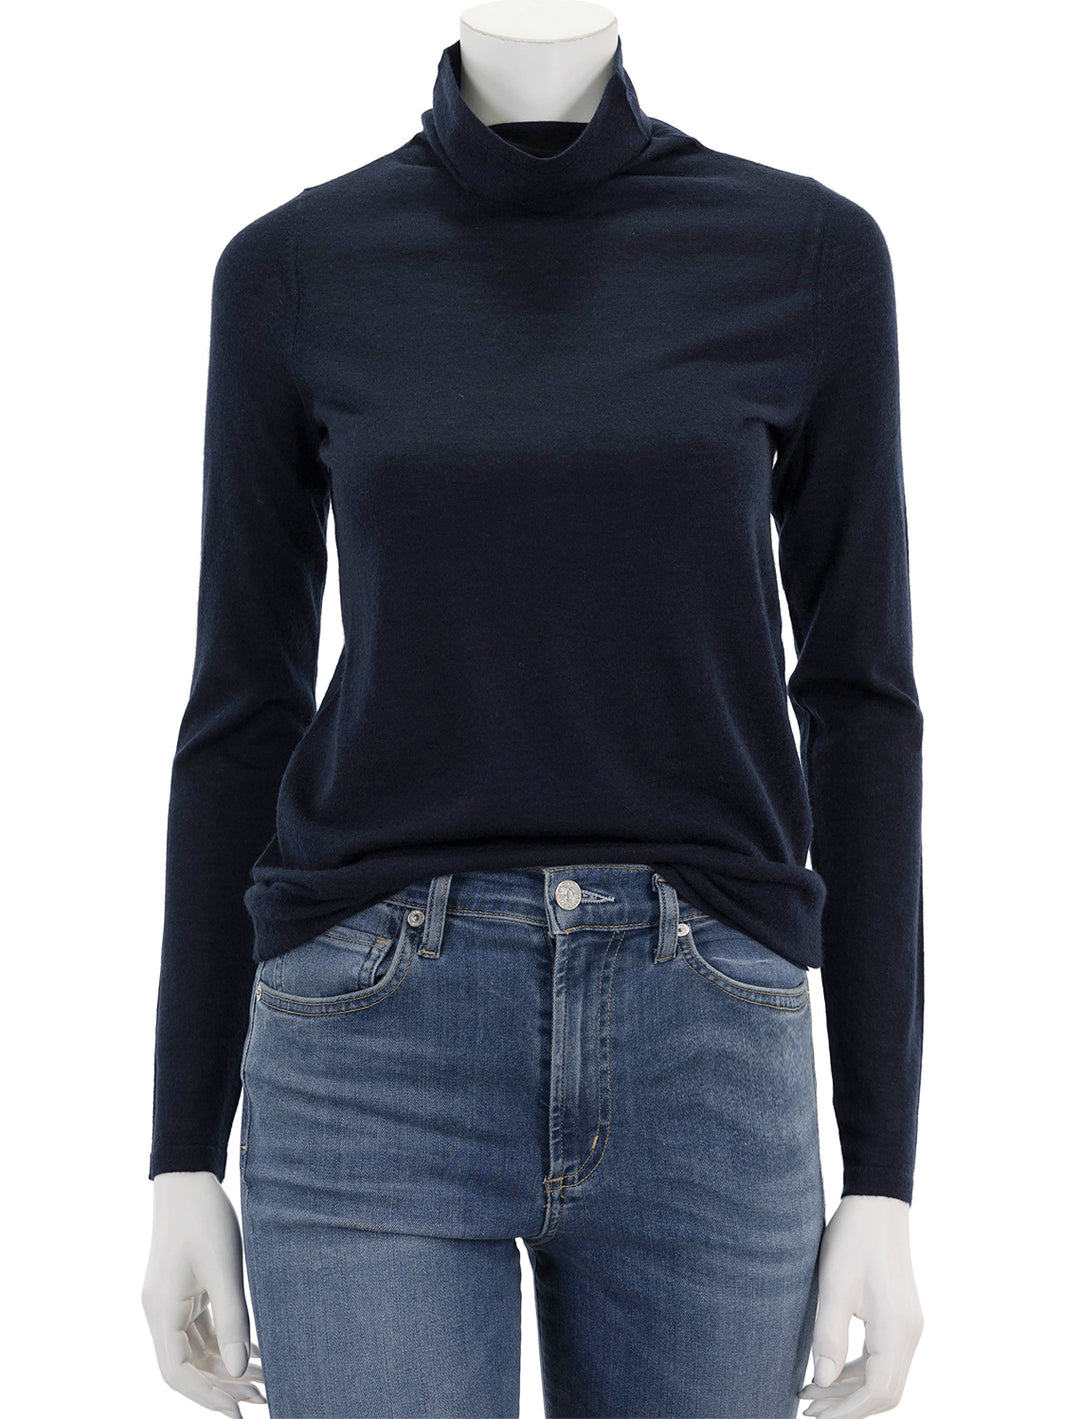 Front view of Ann Mashburn's funnel neck cashmere sweater in navy.